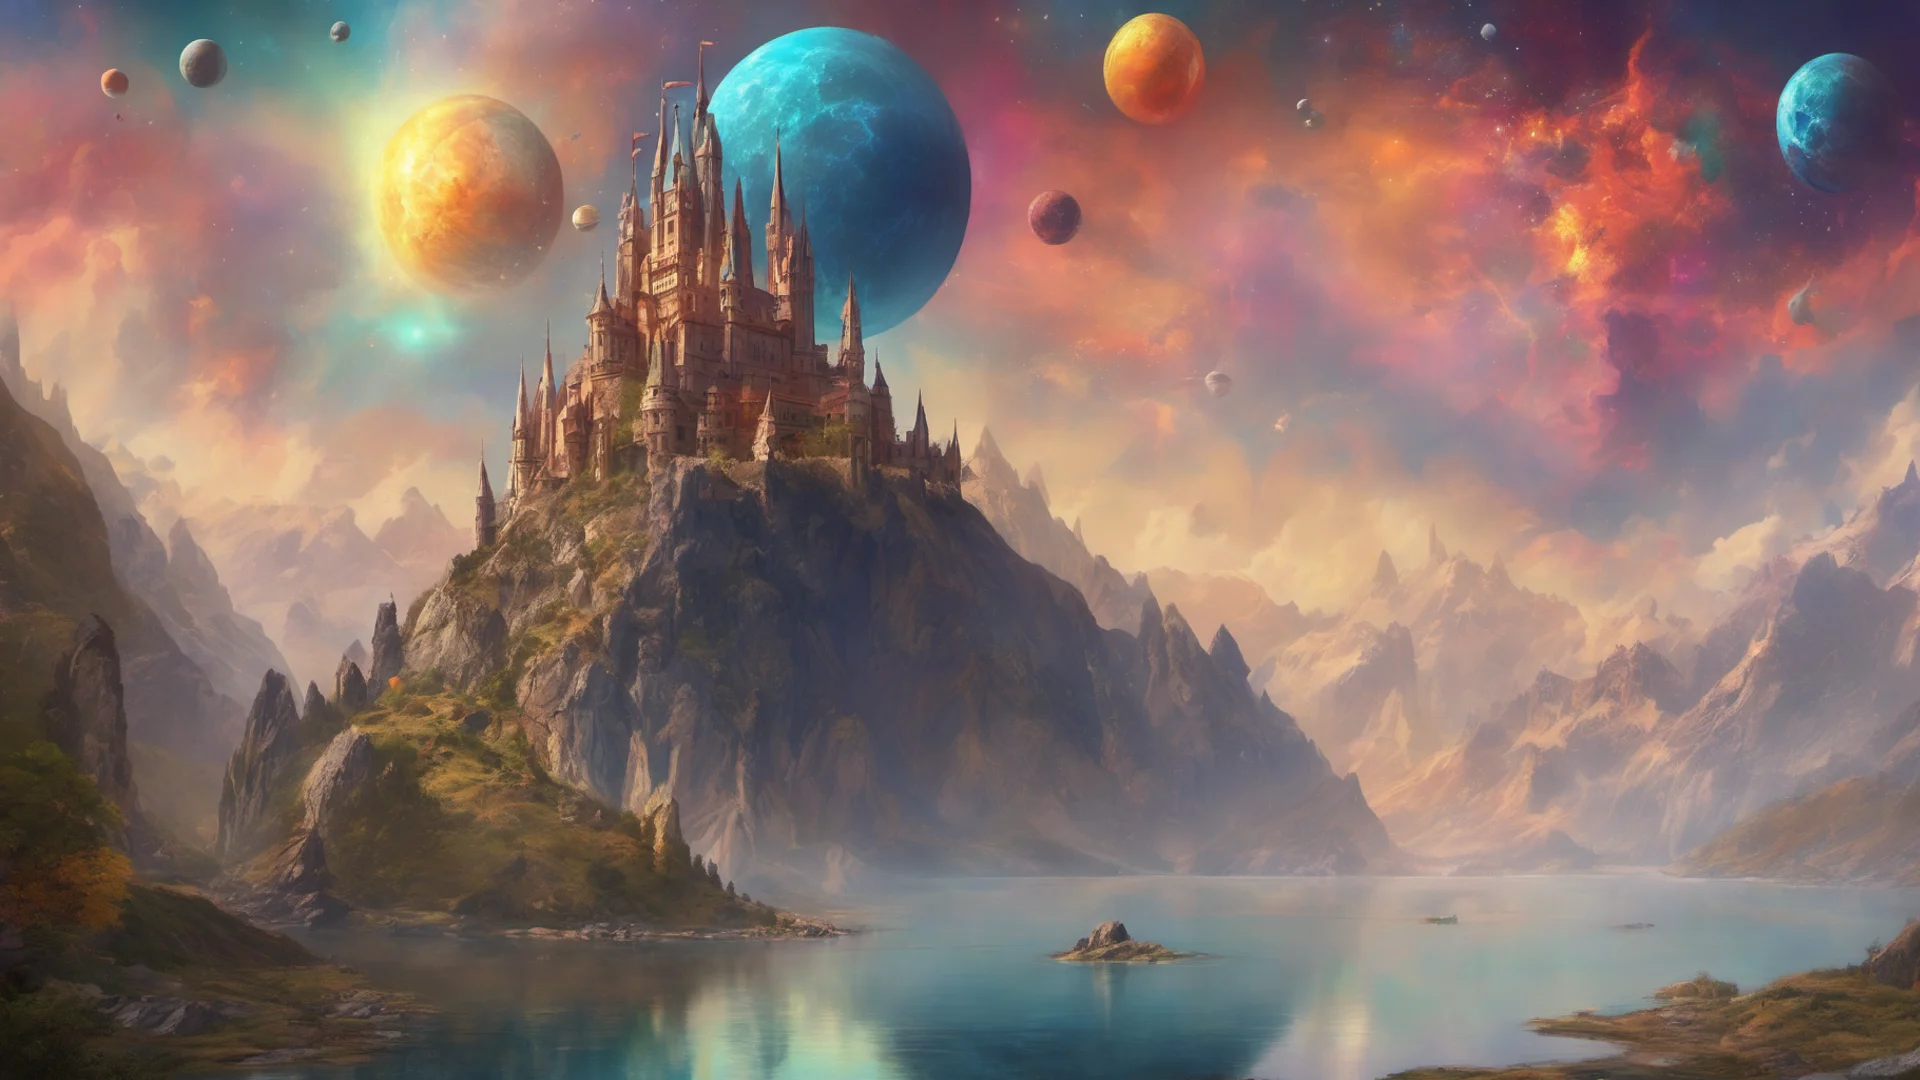 epic fantasy environment castle on tall mountain lakes sky with many colorful planets   amazing awesome portrait 2 wide